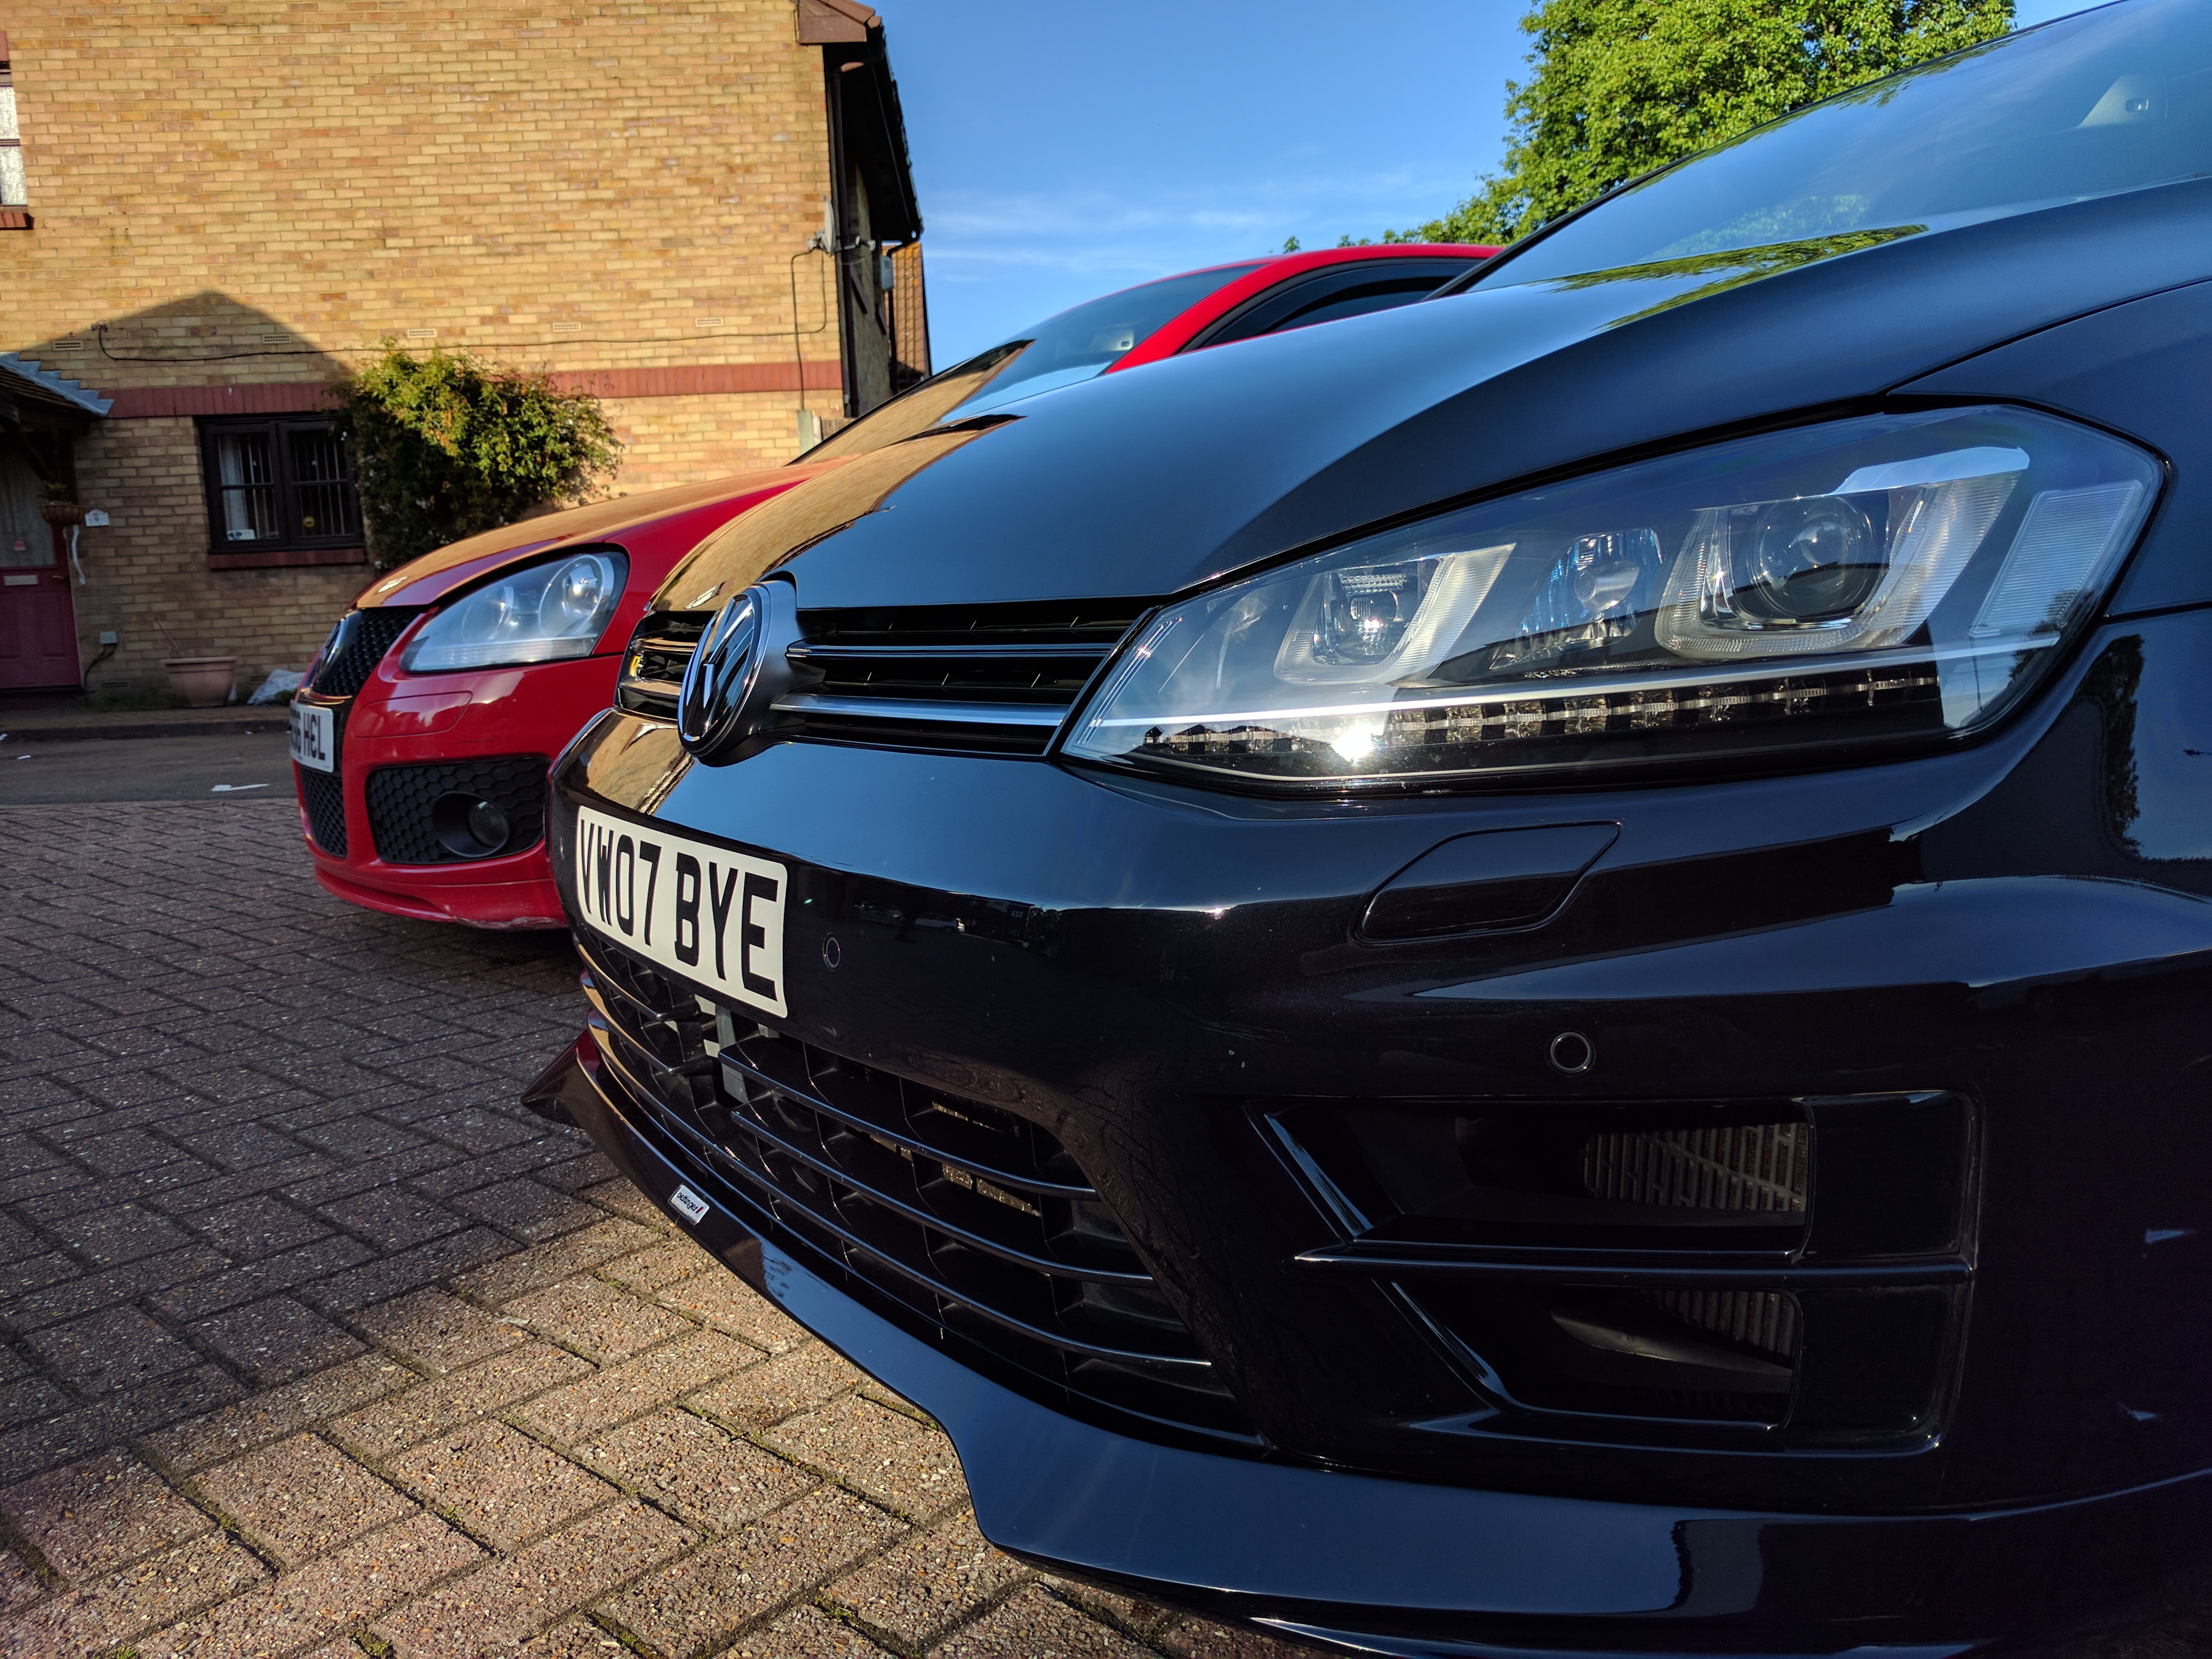 Just installed Philips H7 LED cornering lights in my MK7. Very